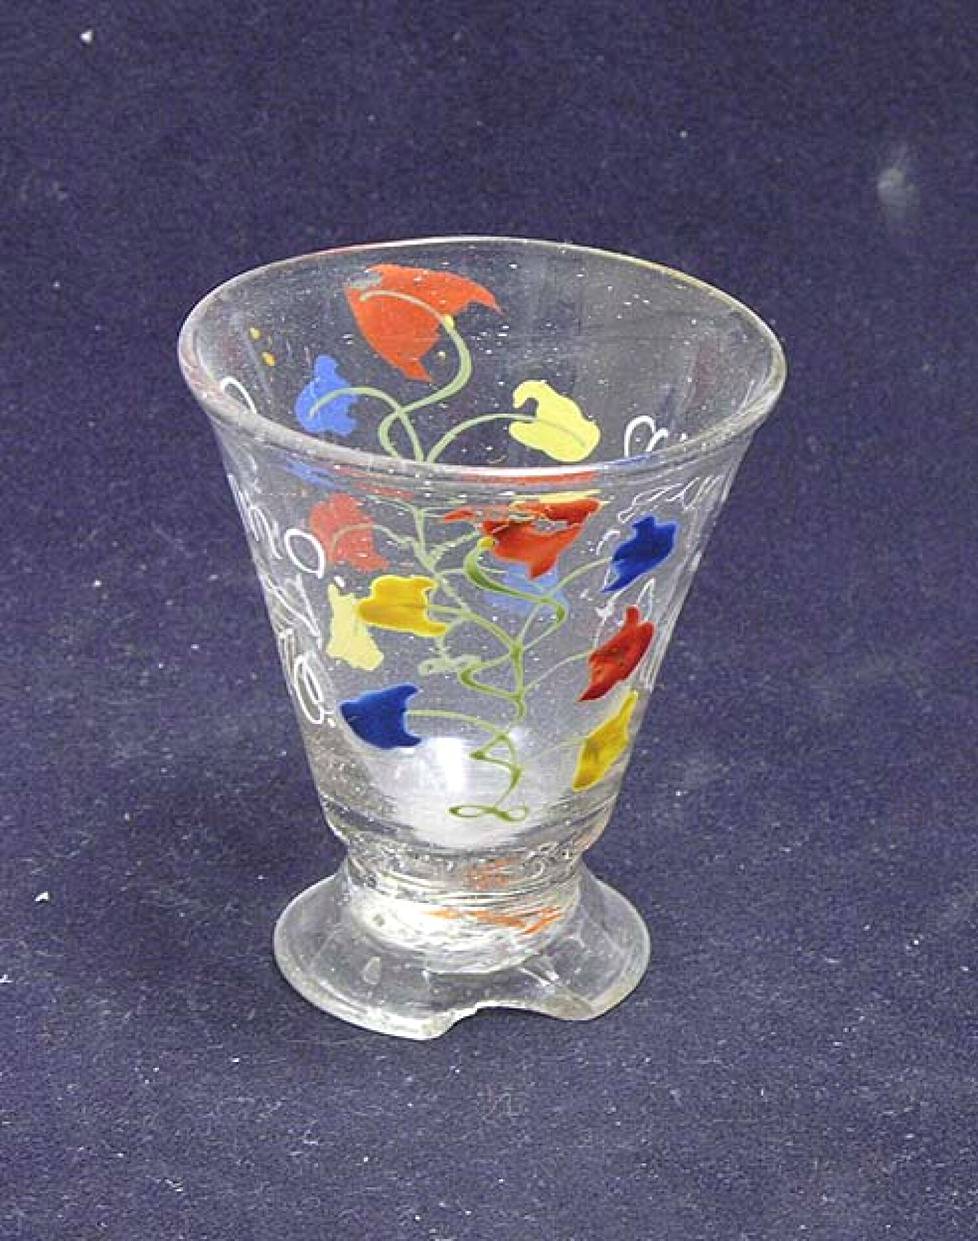 Drinking glass decorated with floral motifs, the Year of Manufacture of which is clear from the text inscribed on the glass: “Anno 1770”.